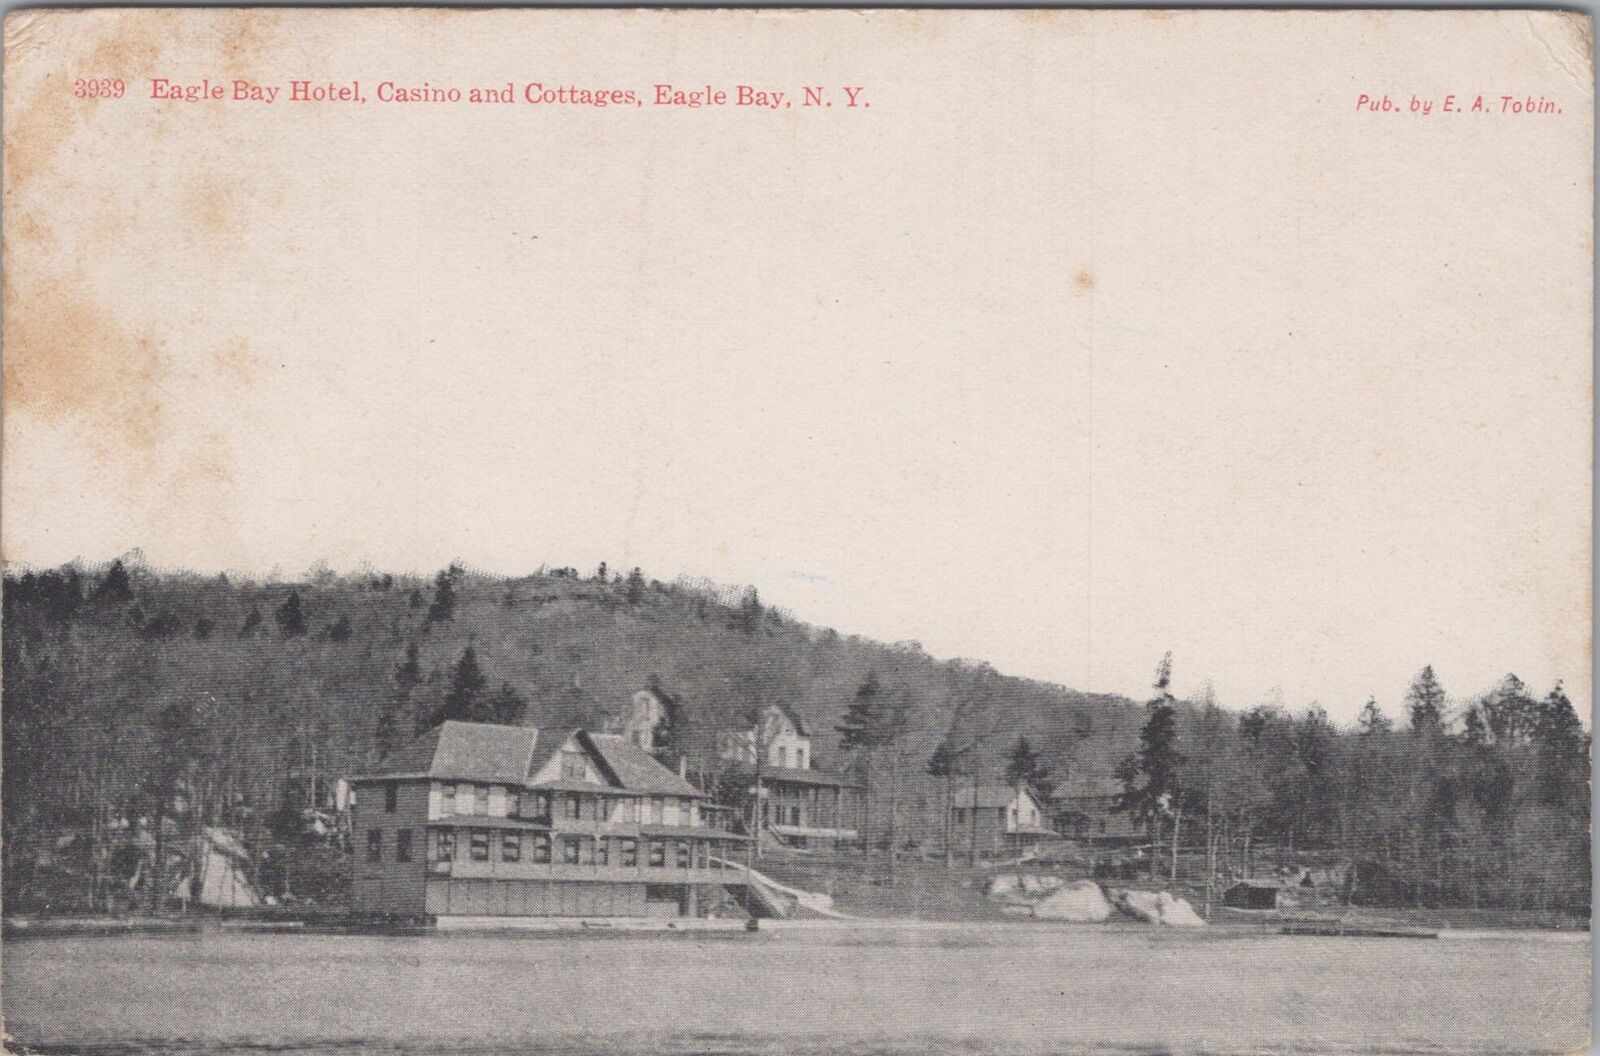 Eagle Bay Hotel, Casino and Cottages, Eagle Bay, New York c1910s Postcard